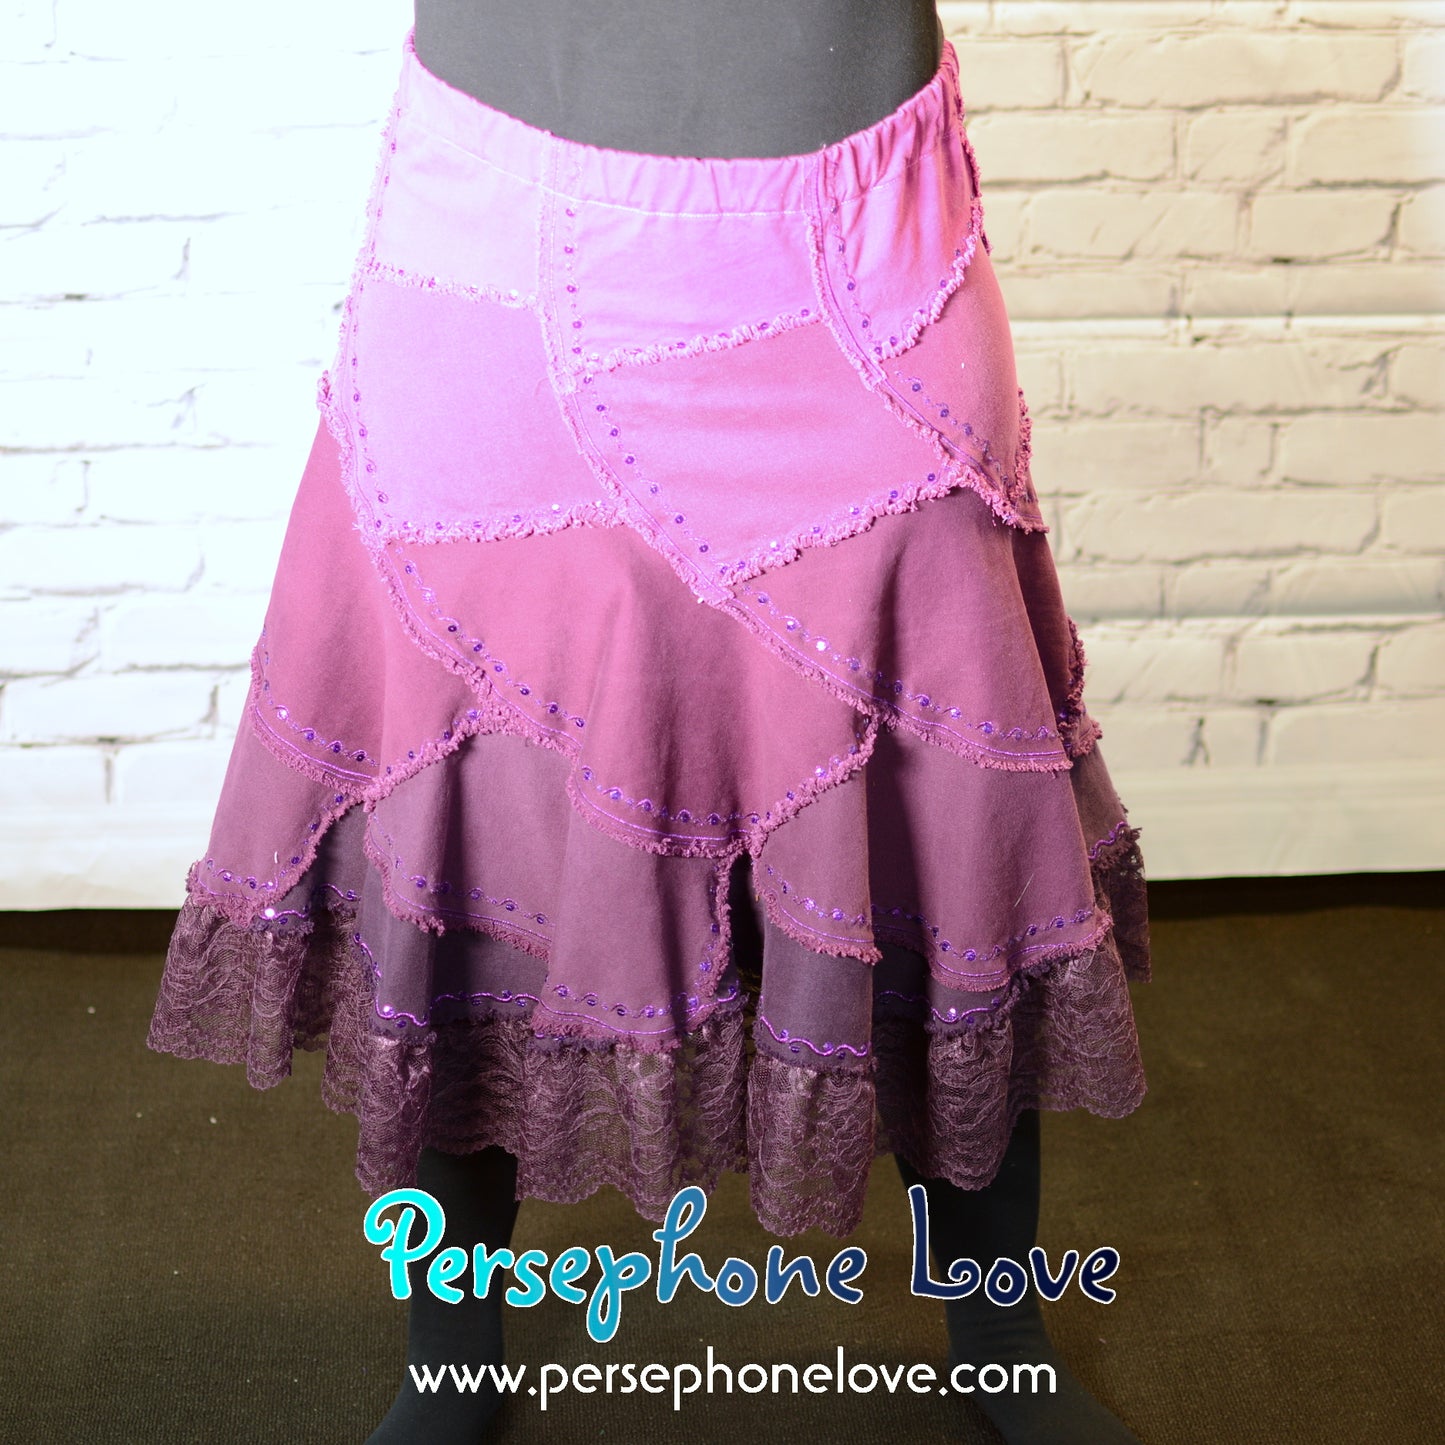 Pink Magenta ombre patchwork denim upcycled twirly spiral skirt with embroidery-2003